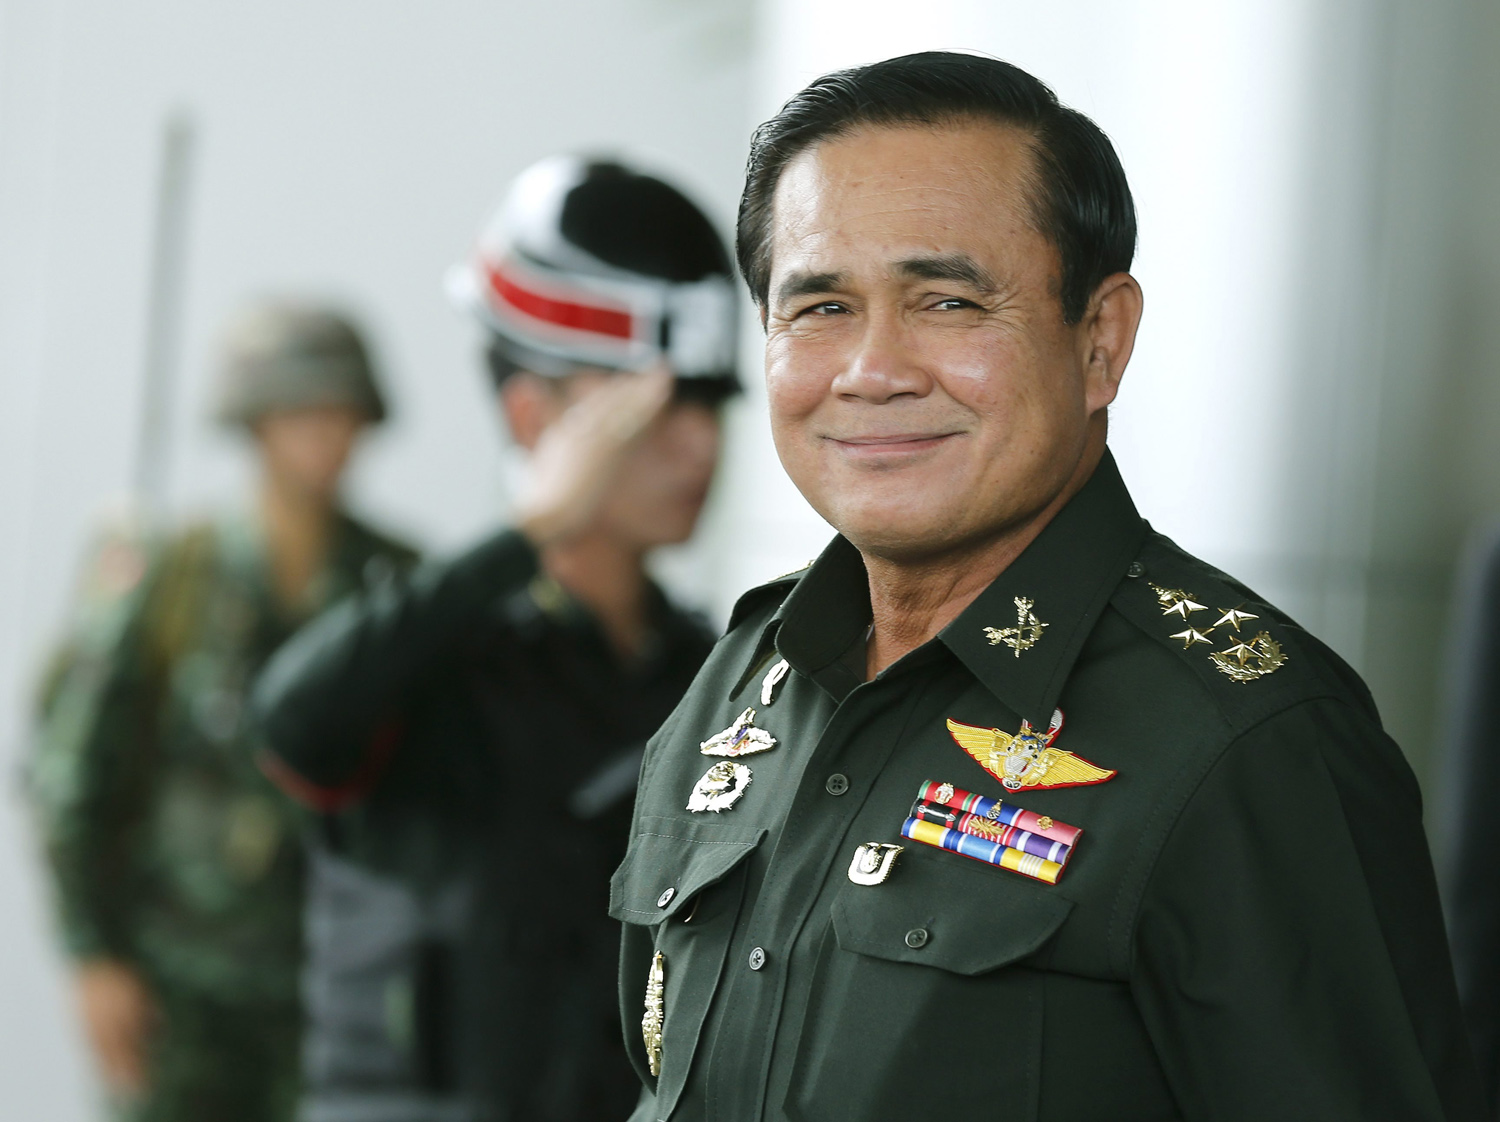 Thai army chief and junta head General Prayuth Chan-ocha smiles as he leave after the meeting of the 2015 national budget at the Army Club in Bangkok, June 13, 2014. (Narong Sangnak—EPA)